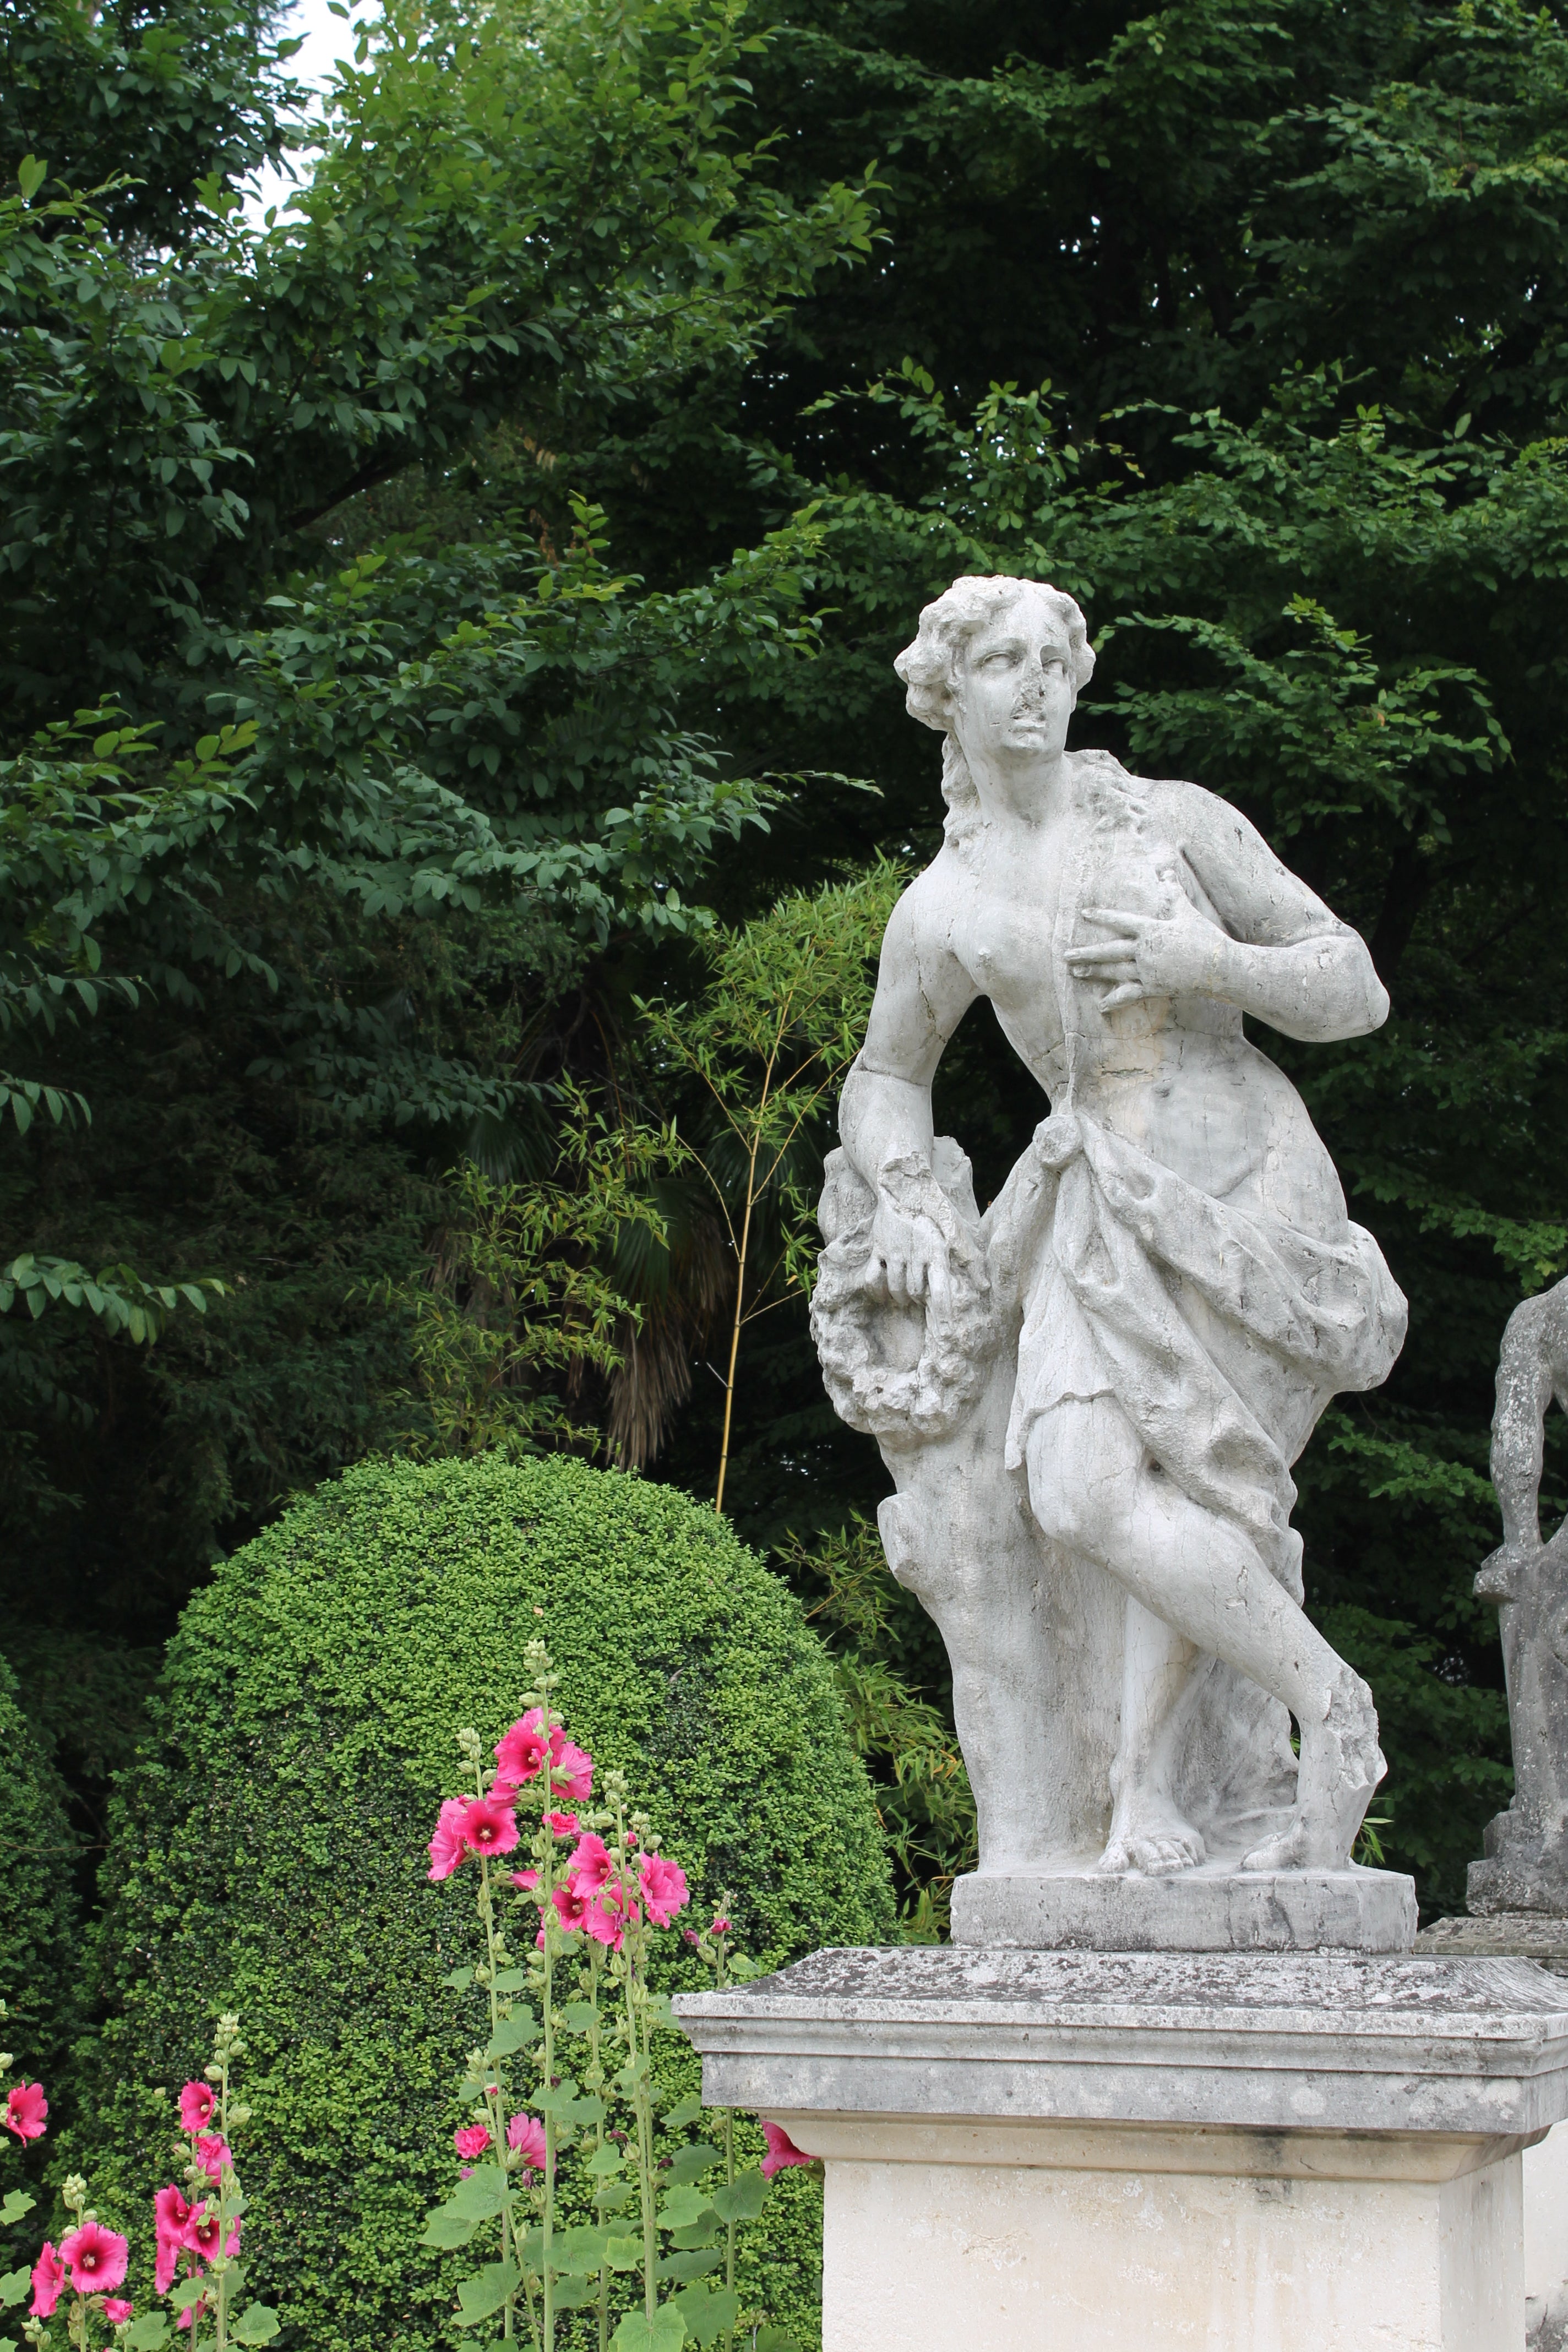 Picture of an ancient statue of a woman from Villa Sandi in Italy, shrubbery behind, for historical consultation page, offering historical research and writing services, Photoshop services, and more.